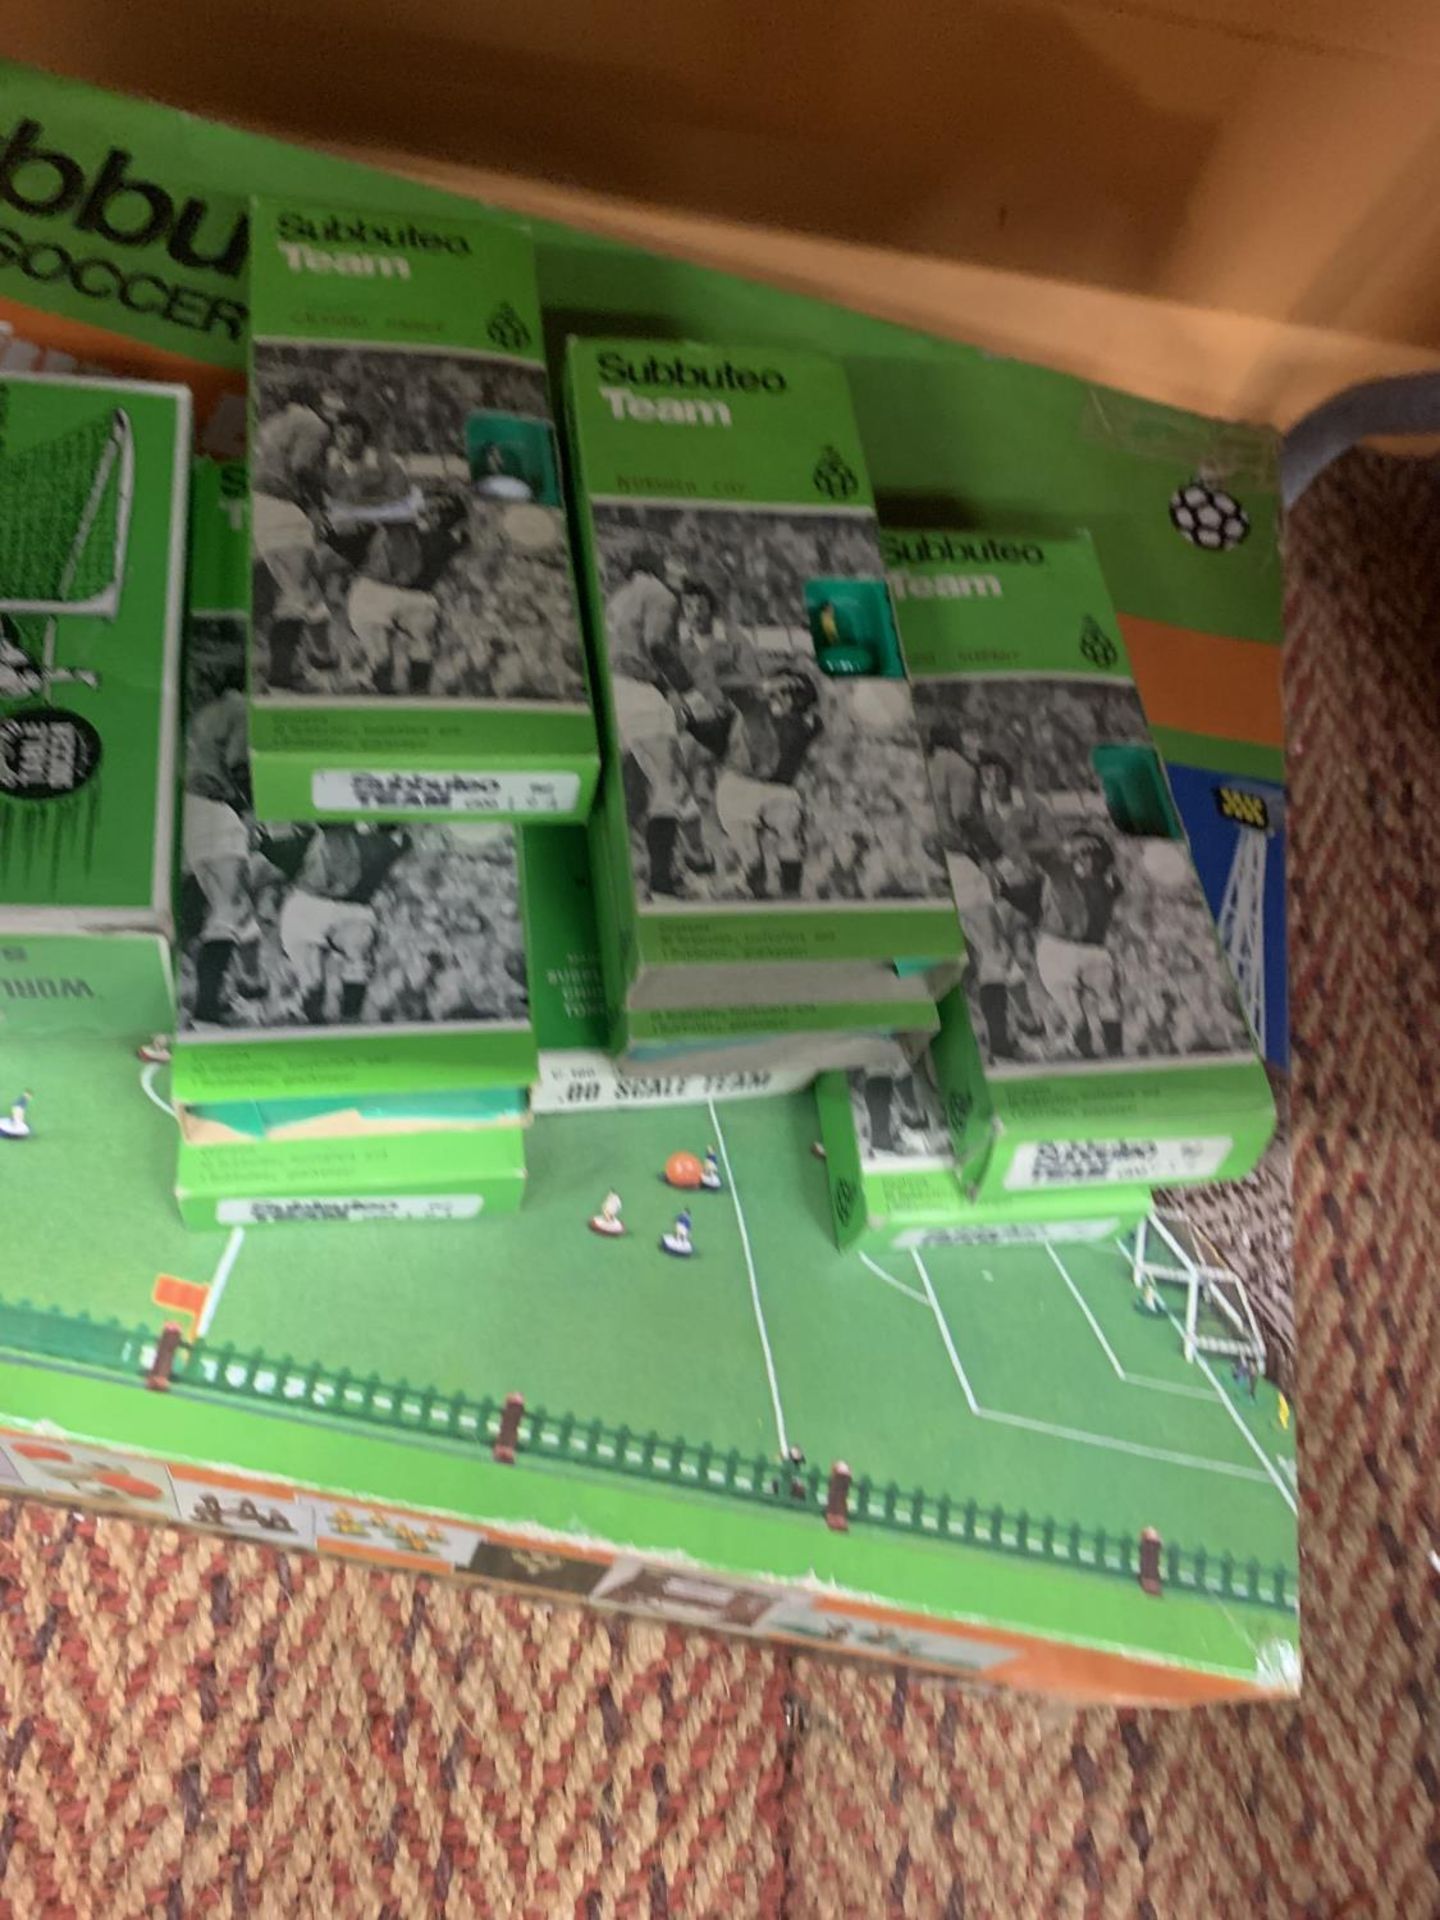 A SUBBUTEO TABLE SOCCER STADIUM EDITION WITH NINE EXTRA TEAMS TO INCLUDE ENGLAND, MAN CITY, WALES, - Image 3 of 5